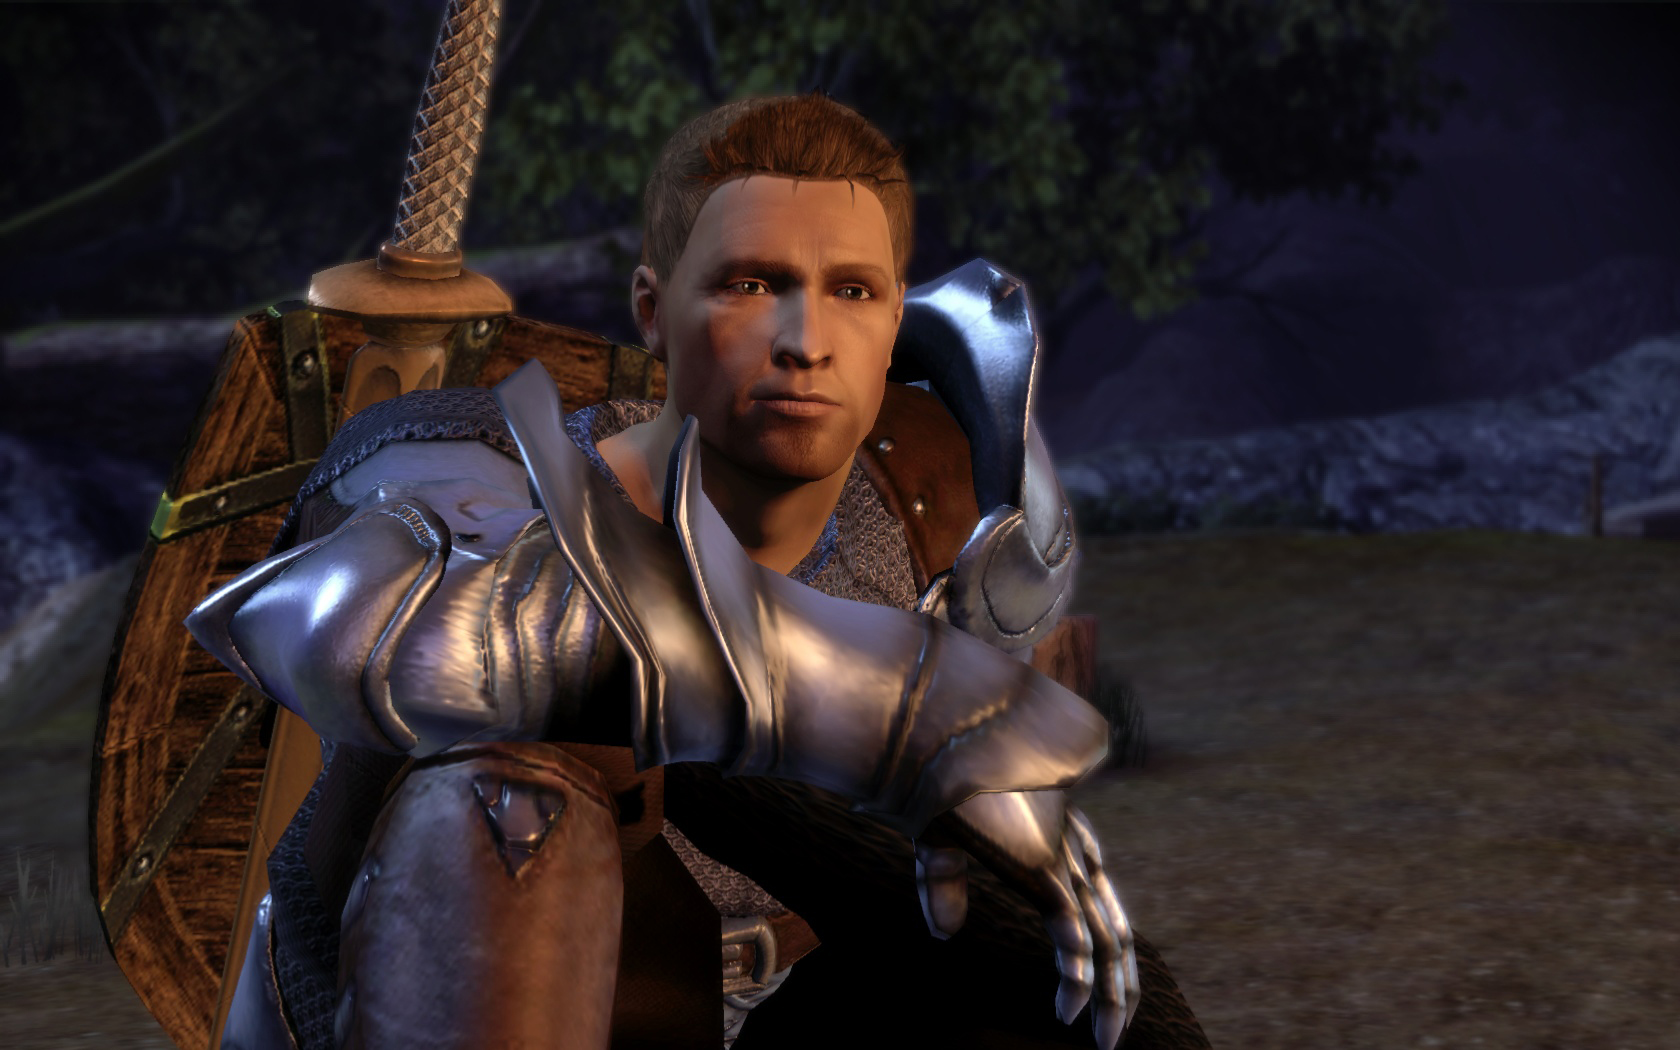 Alistair - Dragon Age - Character profile - Early life and context